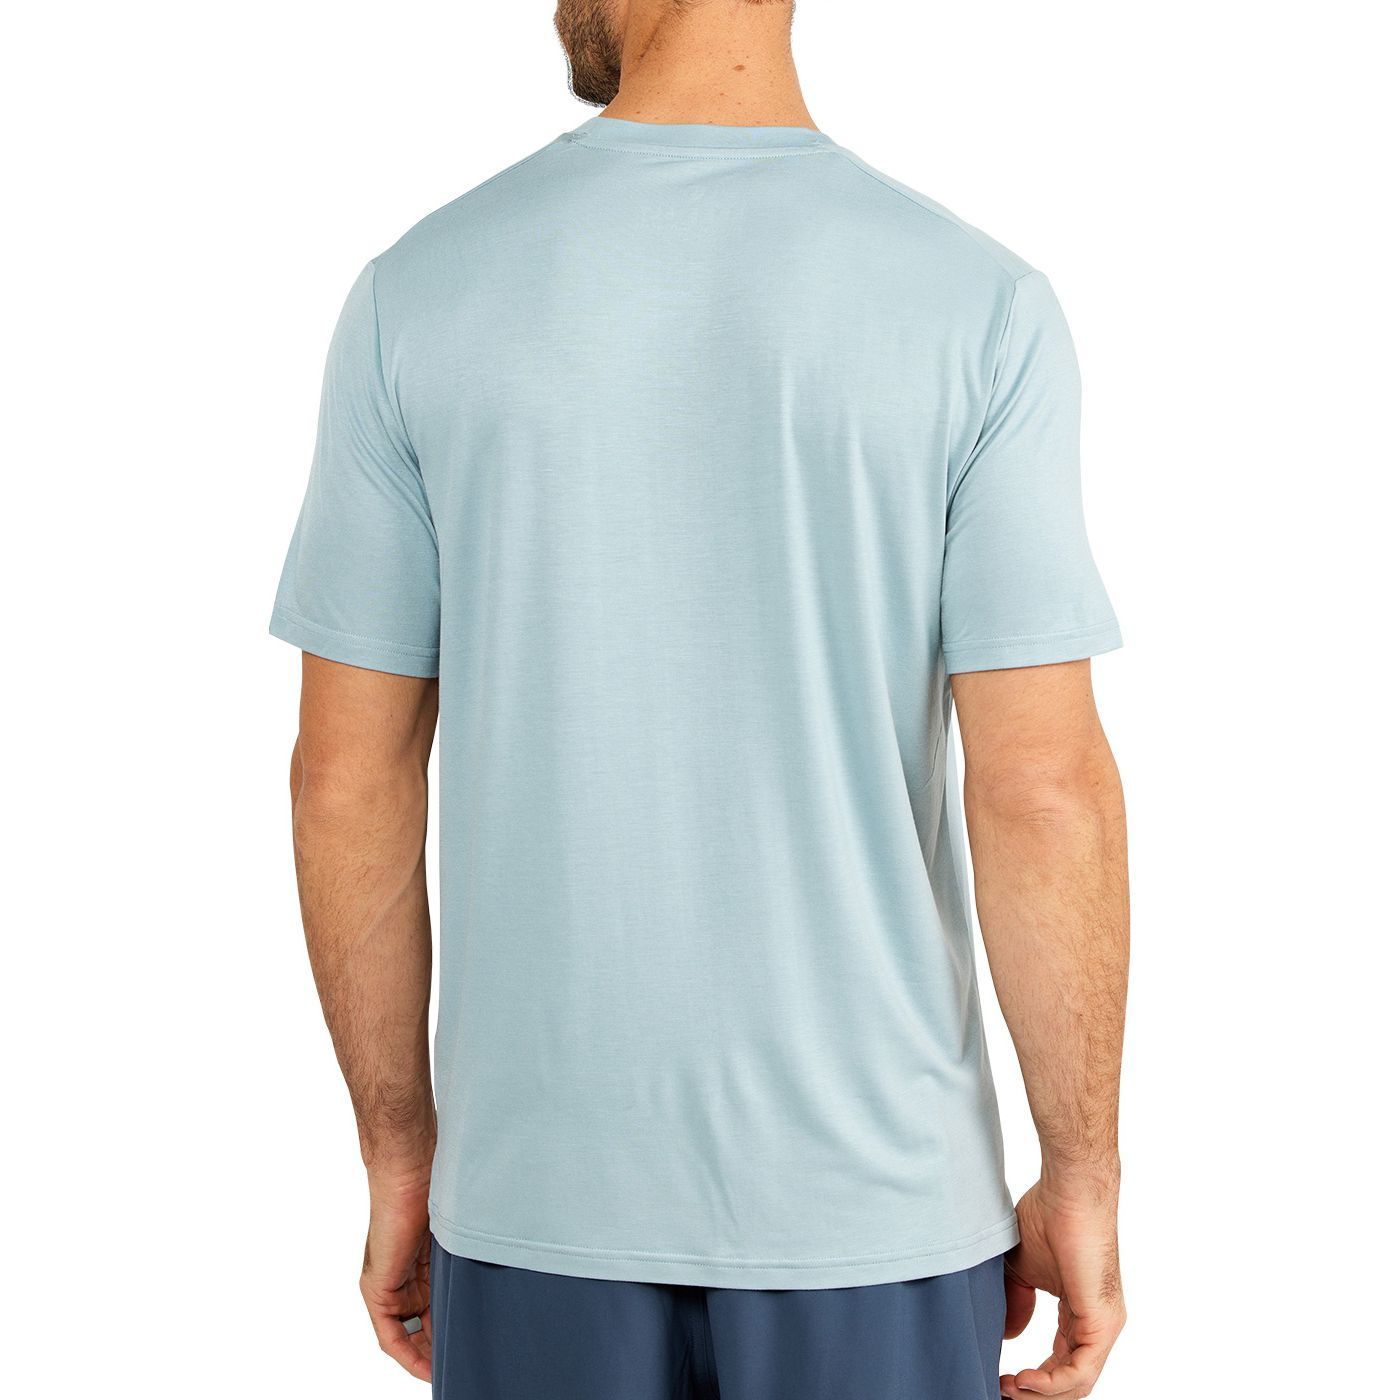 Free Fly Bamboo Motion Tee Ocean Mist Image 2